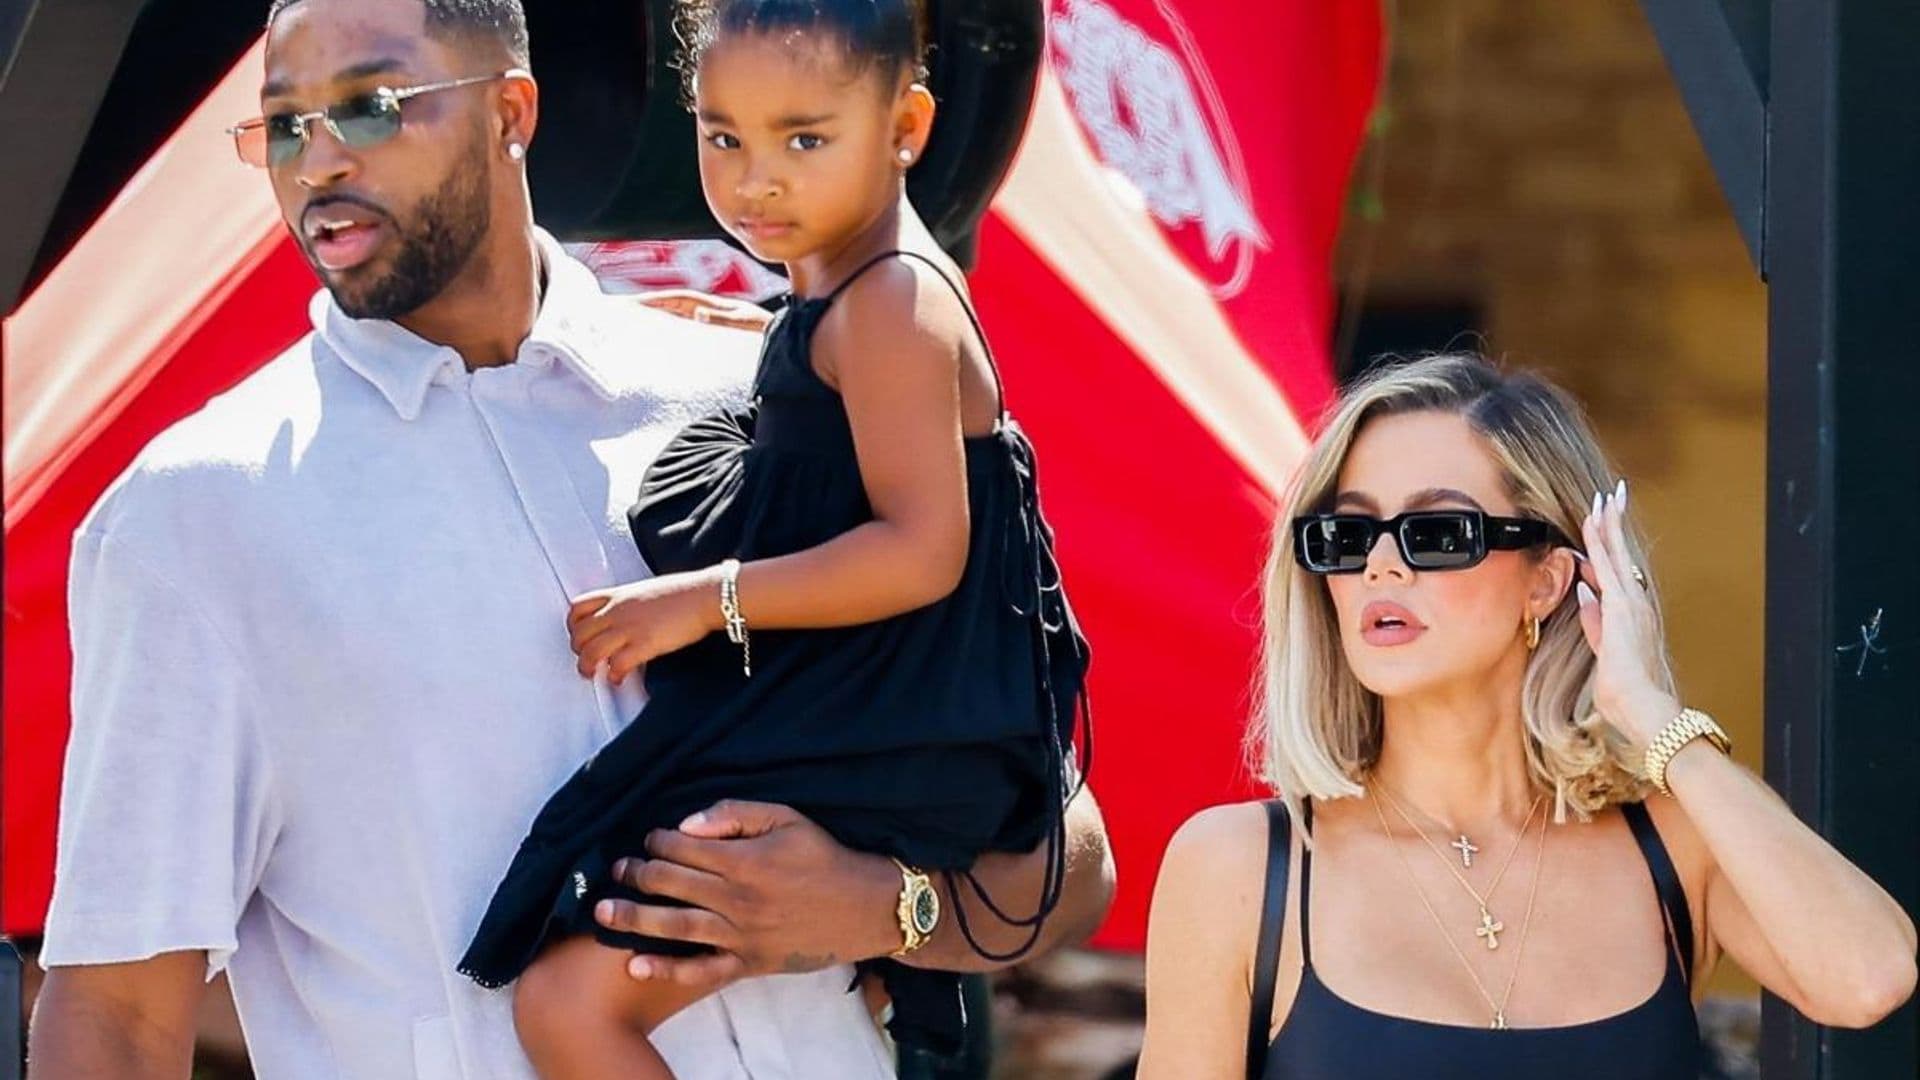 Khloé Kardashian and Tristan Thompson’s daughter True begins a new chapter